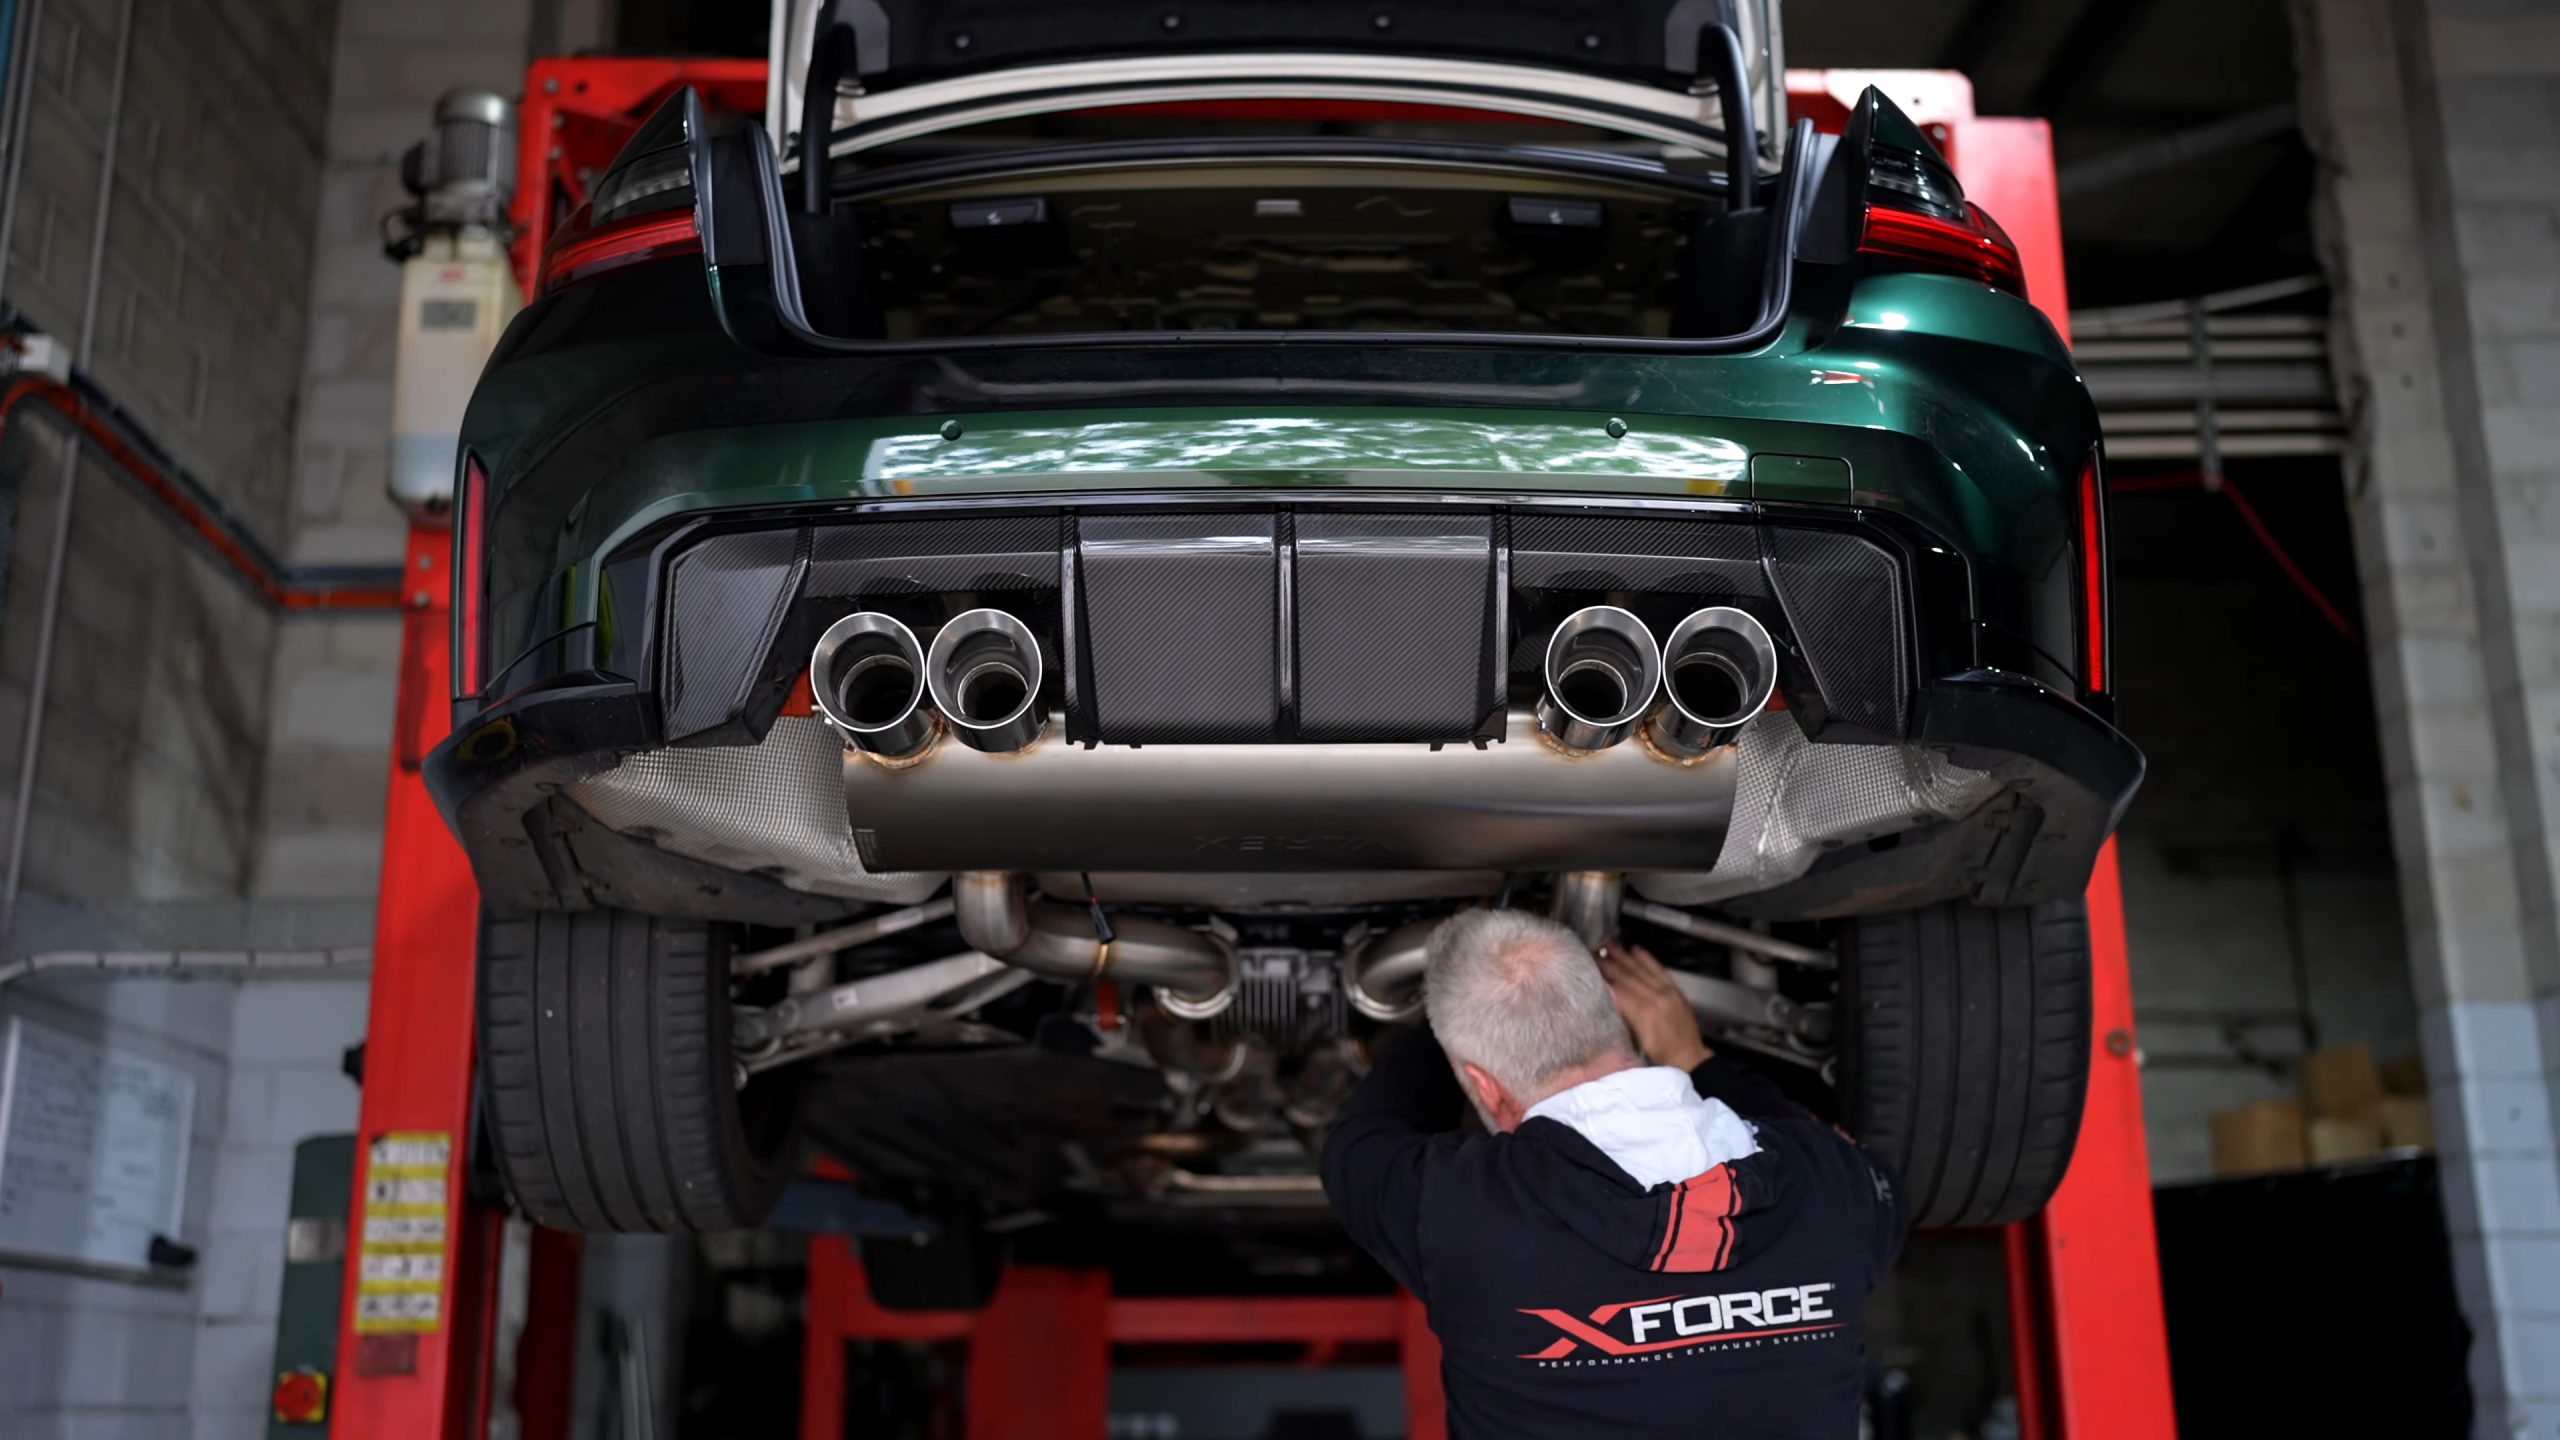 The Superiority of Aftermarket Performance Exhausts, Spotlight on XForce